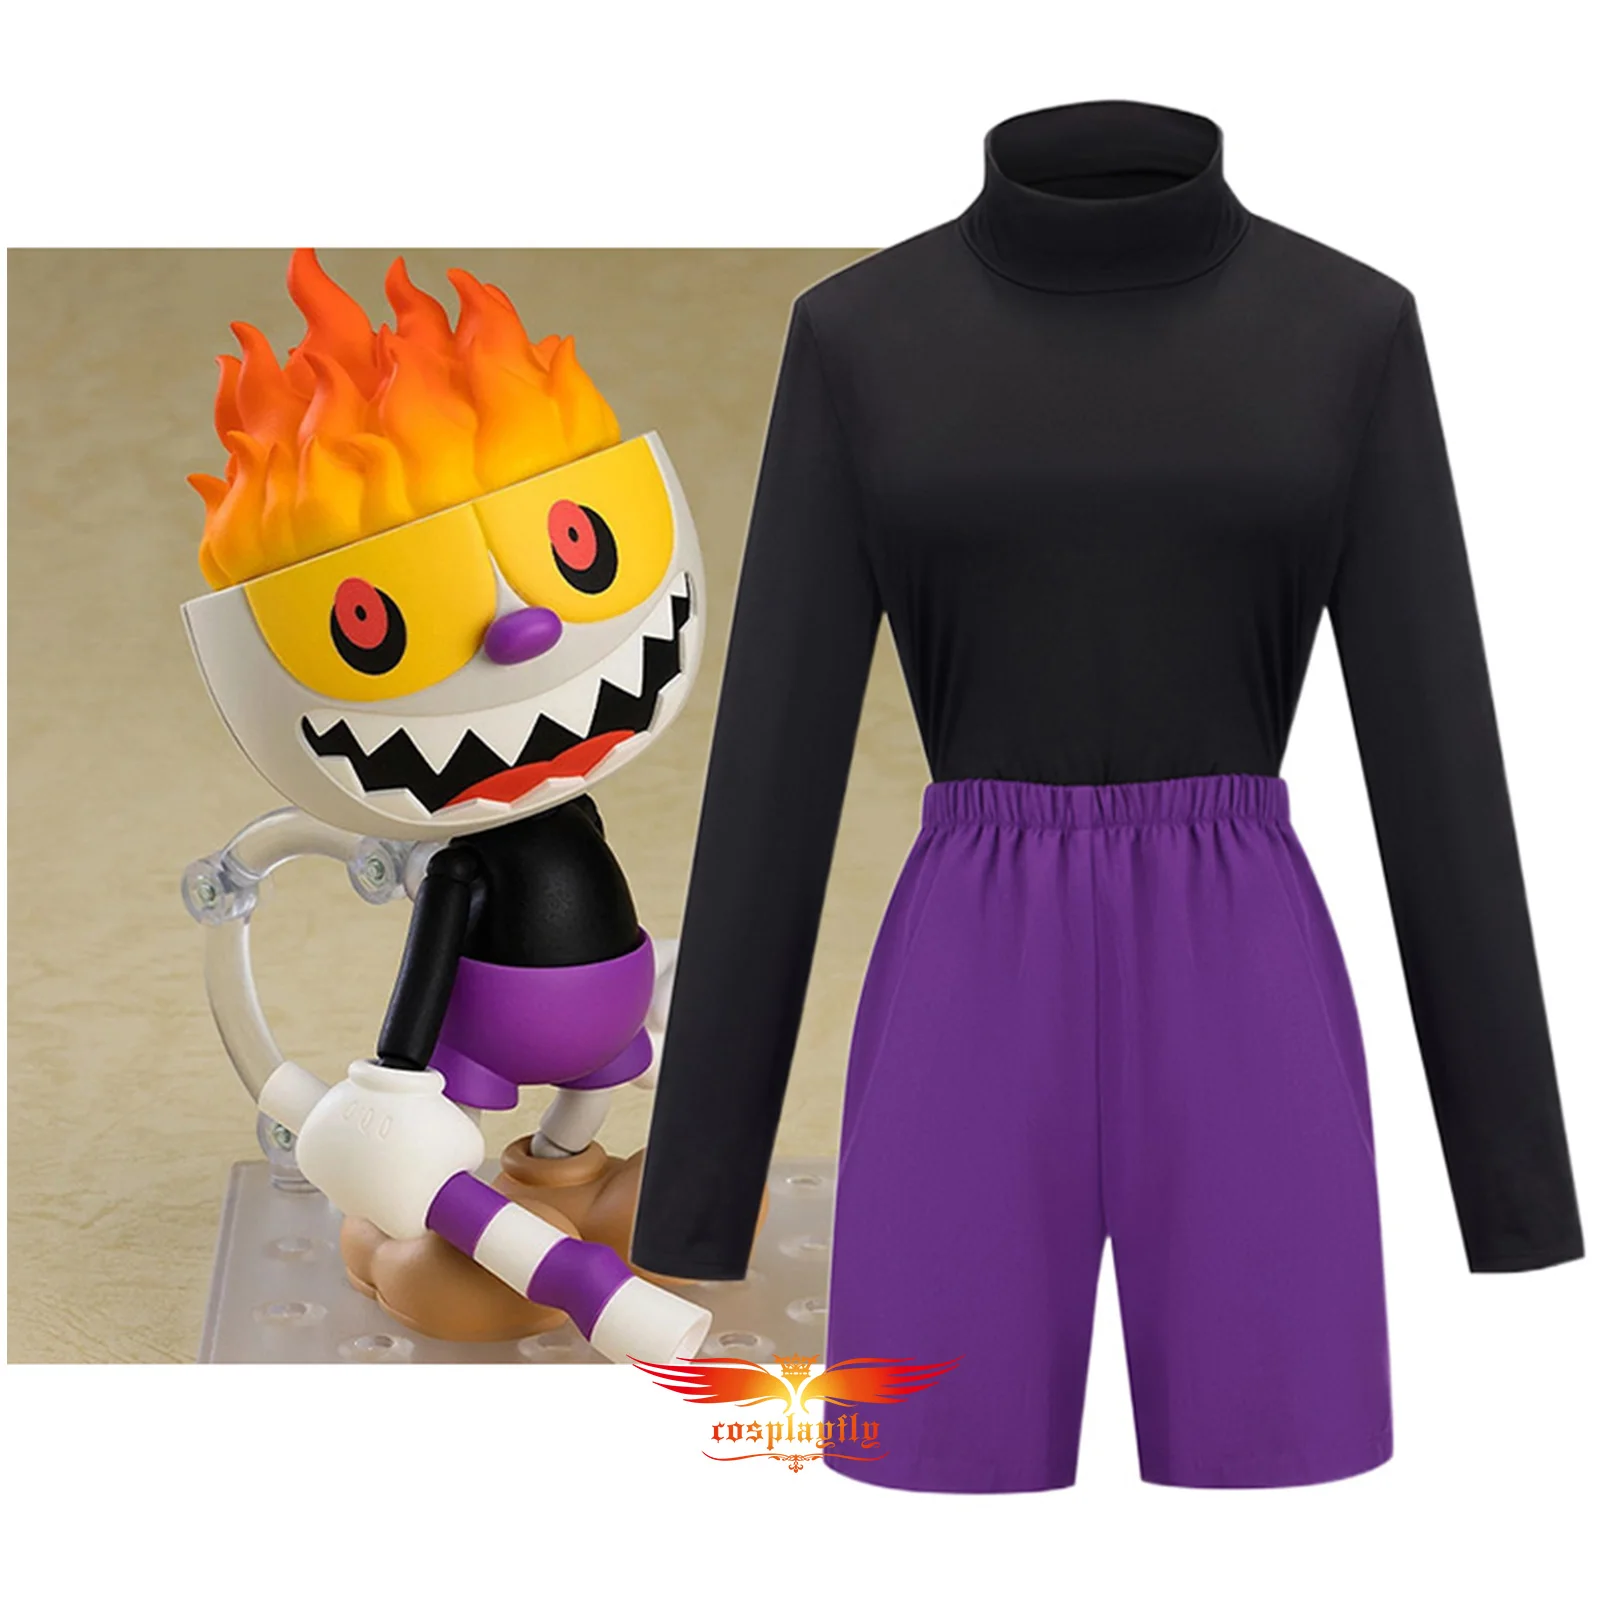 

Turtleneck Top Purple Shorts Anime The Cuphead Show! Cosplay Costume for Women Girl Children Kids Parent-Child Outfit Halloween